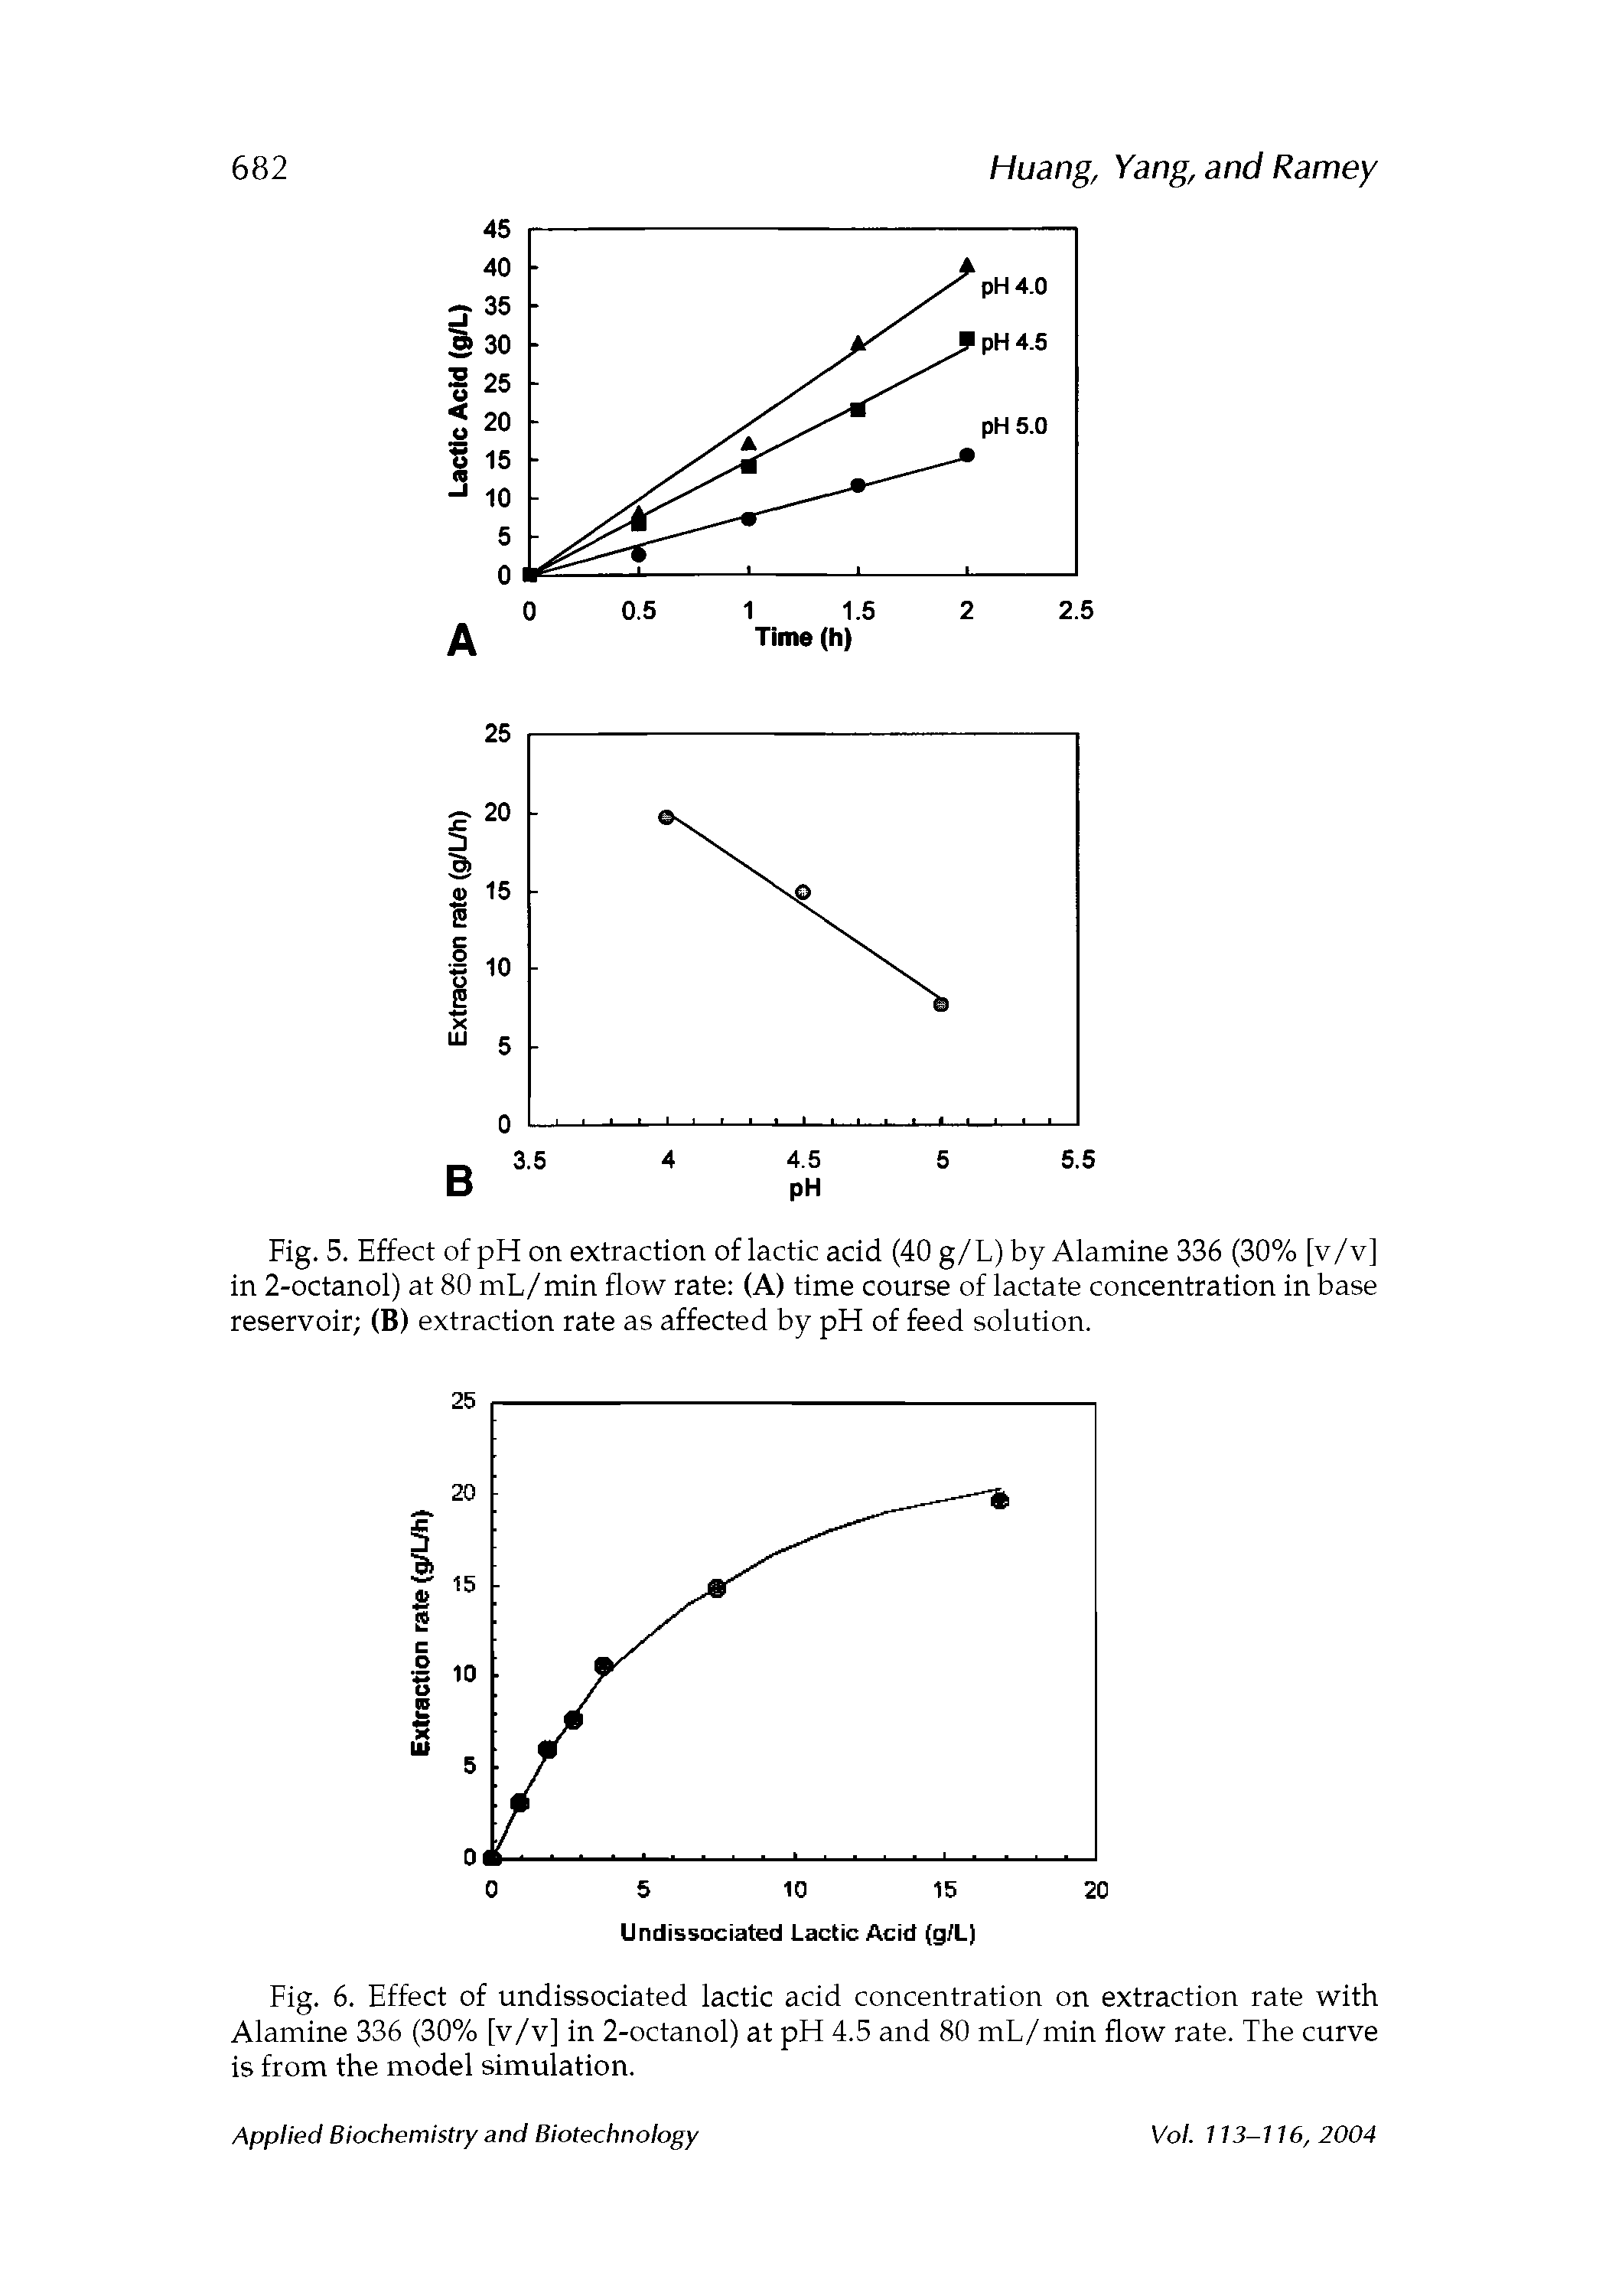 Fig. 5. Effect of pH on extraction of lactic acid (40 g/L) by Alamine 336 (30% [v/v] in 2-octanol) at 80 mL/min flow rate (A) time course of lactate concentration in base reservoir (B) extraction rate as affected by pH of feed solution.